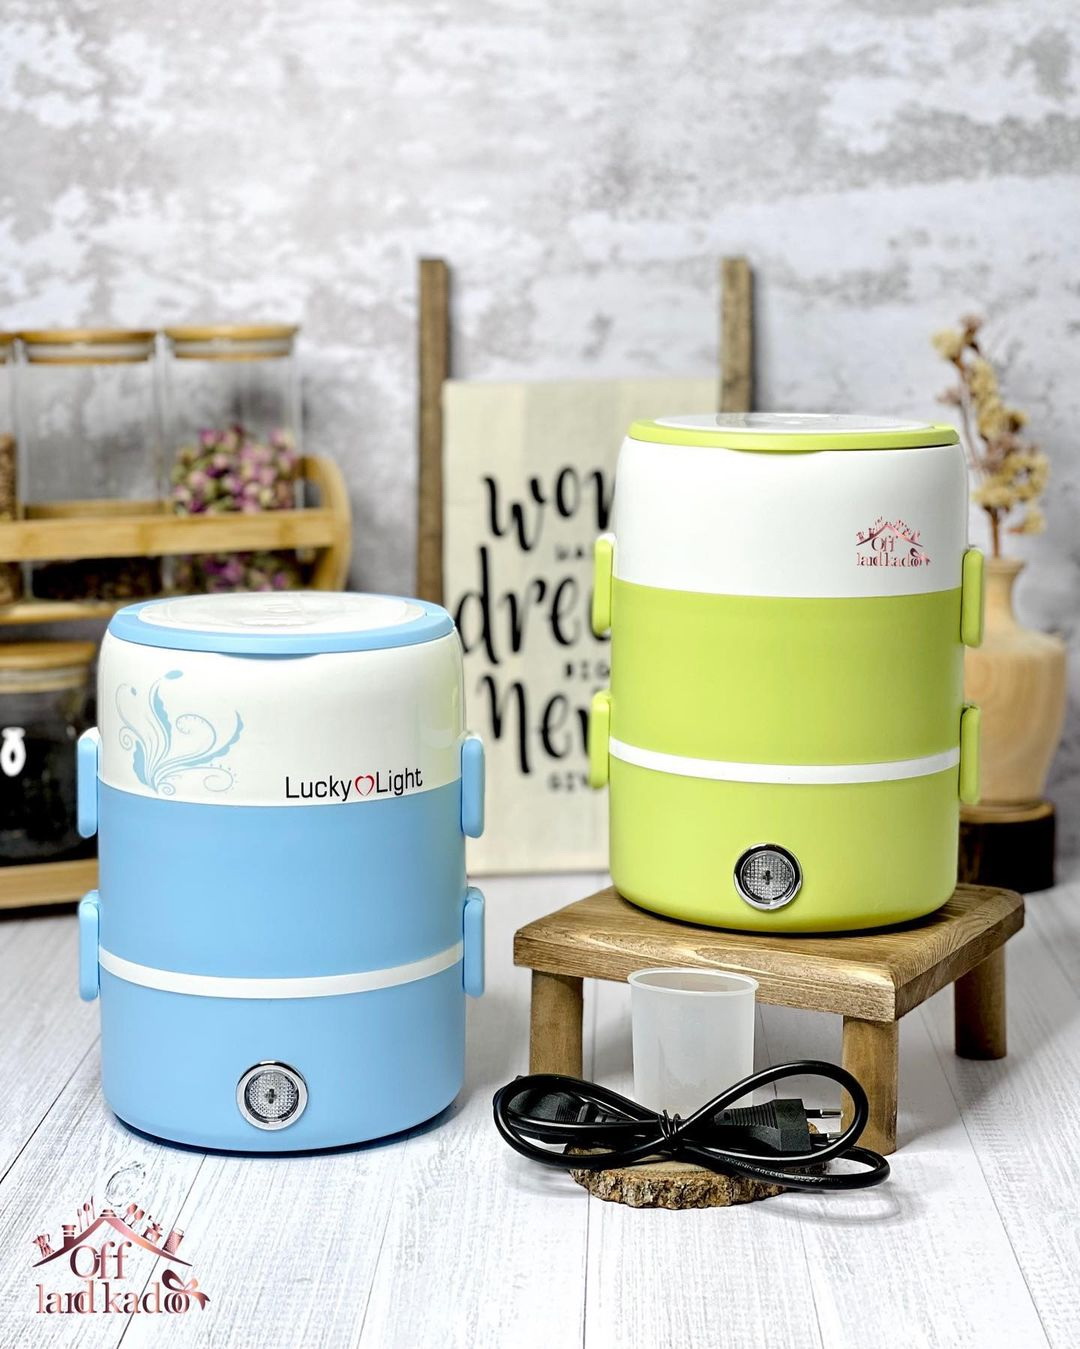 Electric-Lunch-Box-1-2L-2-Layer-Portable-Rice-Cooker-Steamer